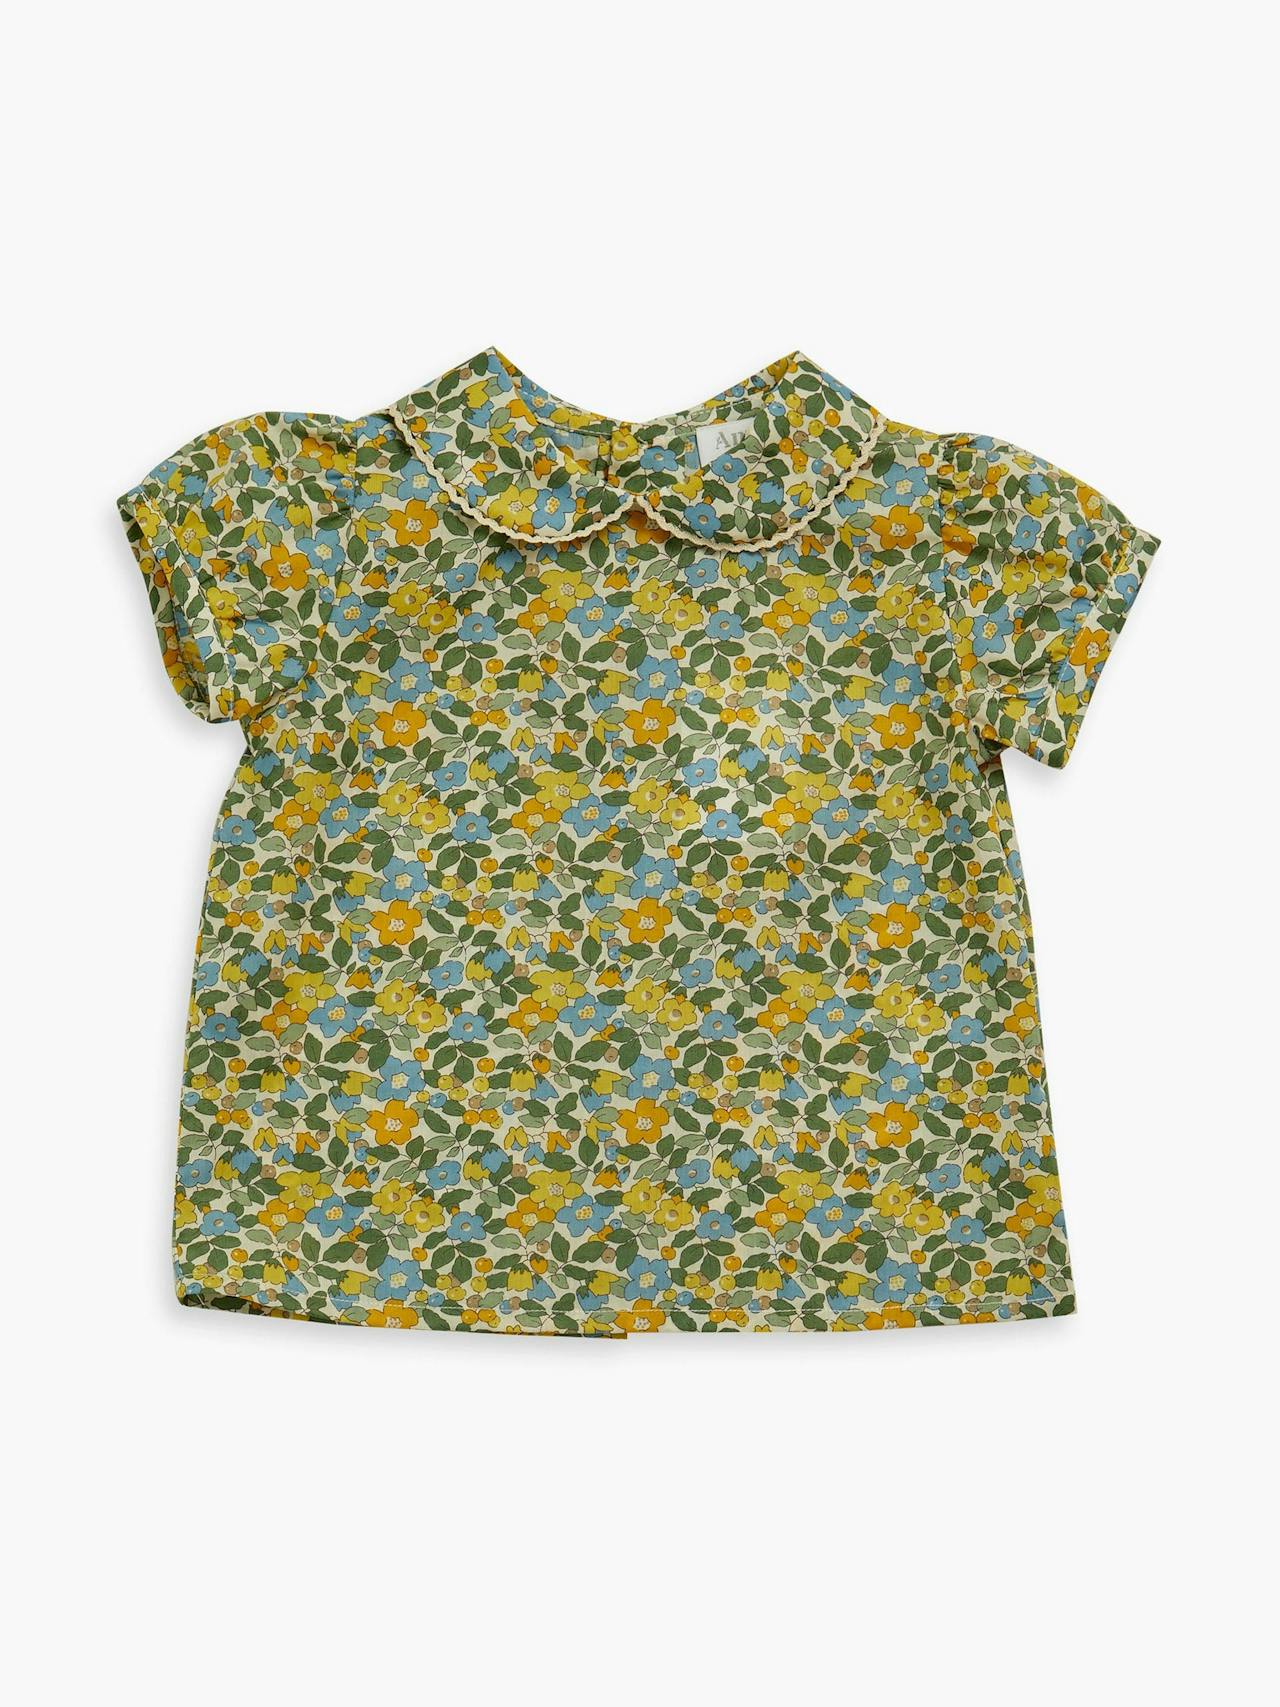 Coline baby blouse Betsy berry liberty